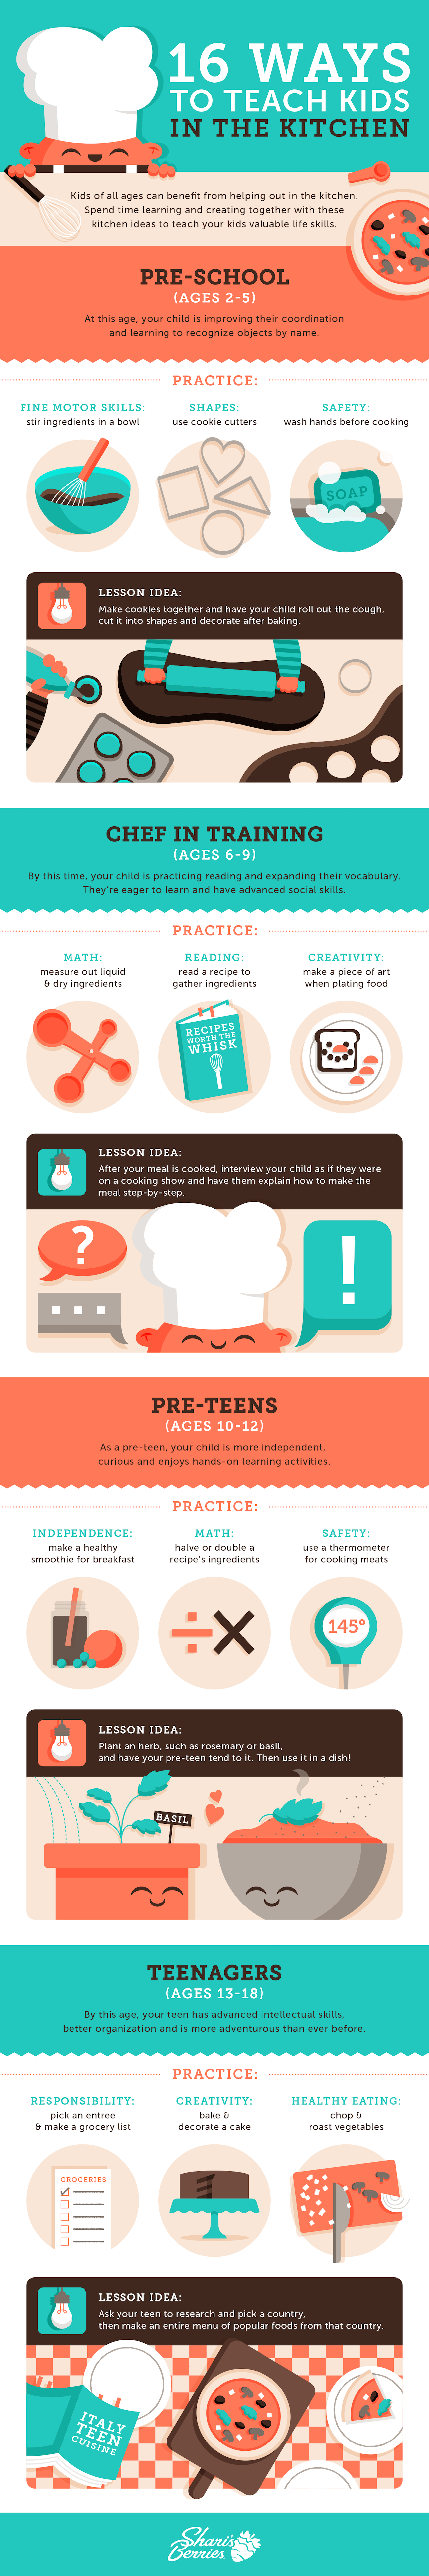 https://www.berries.com/blog/wp-content/uploads/2019/02/SB-16-Ways-to-Teach-Kids-in-the-Kitchen-infographic-v4-2.png